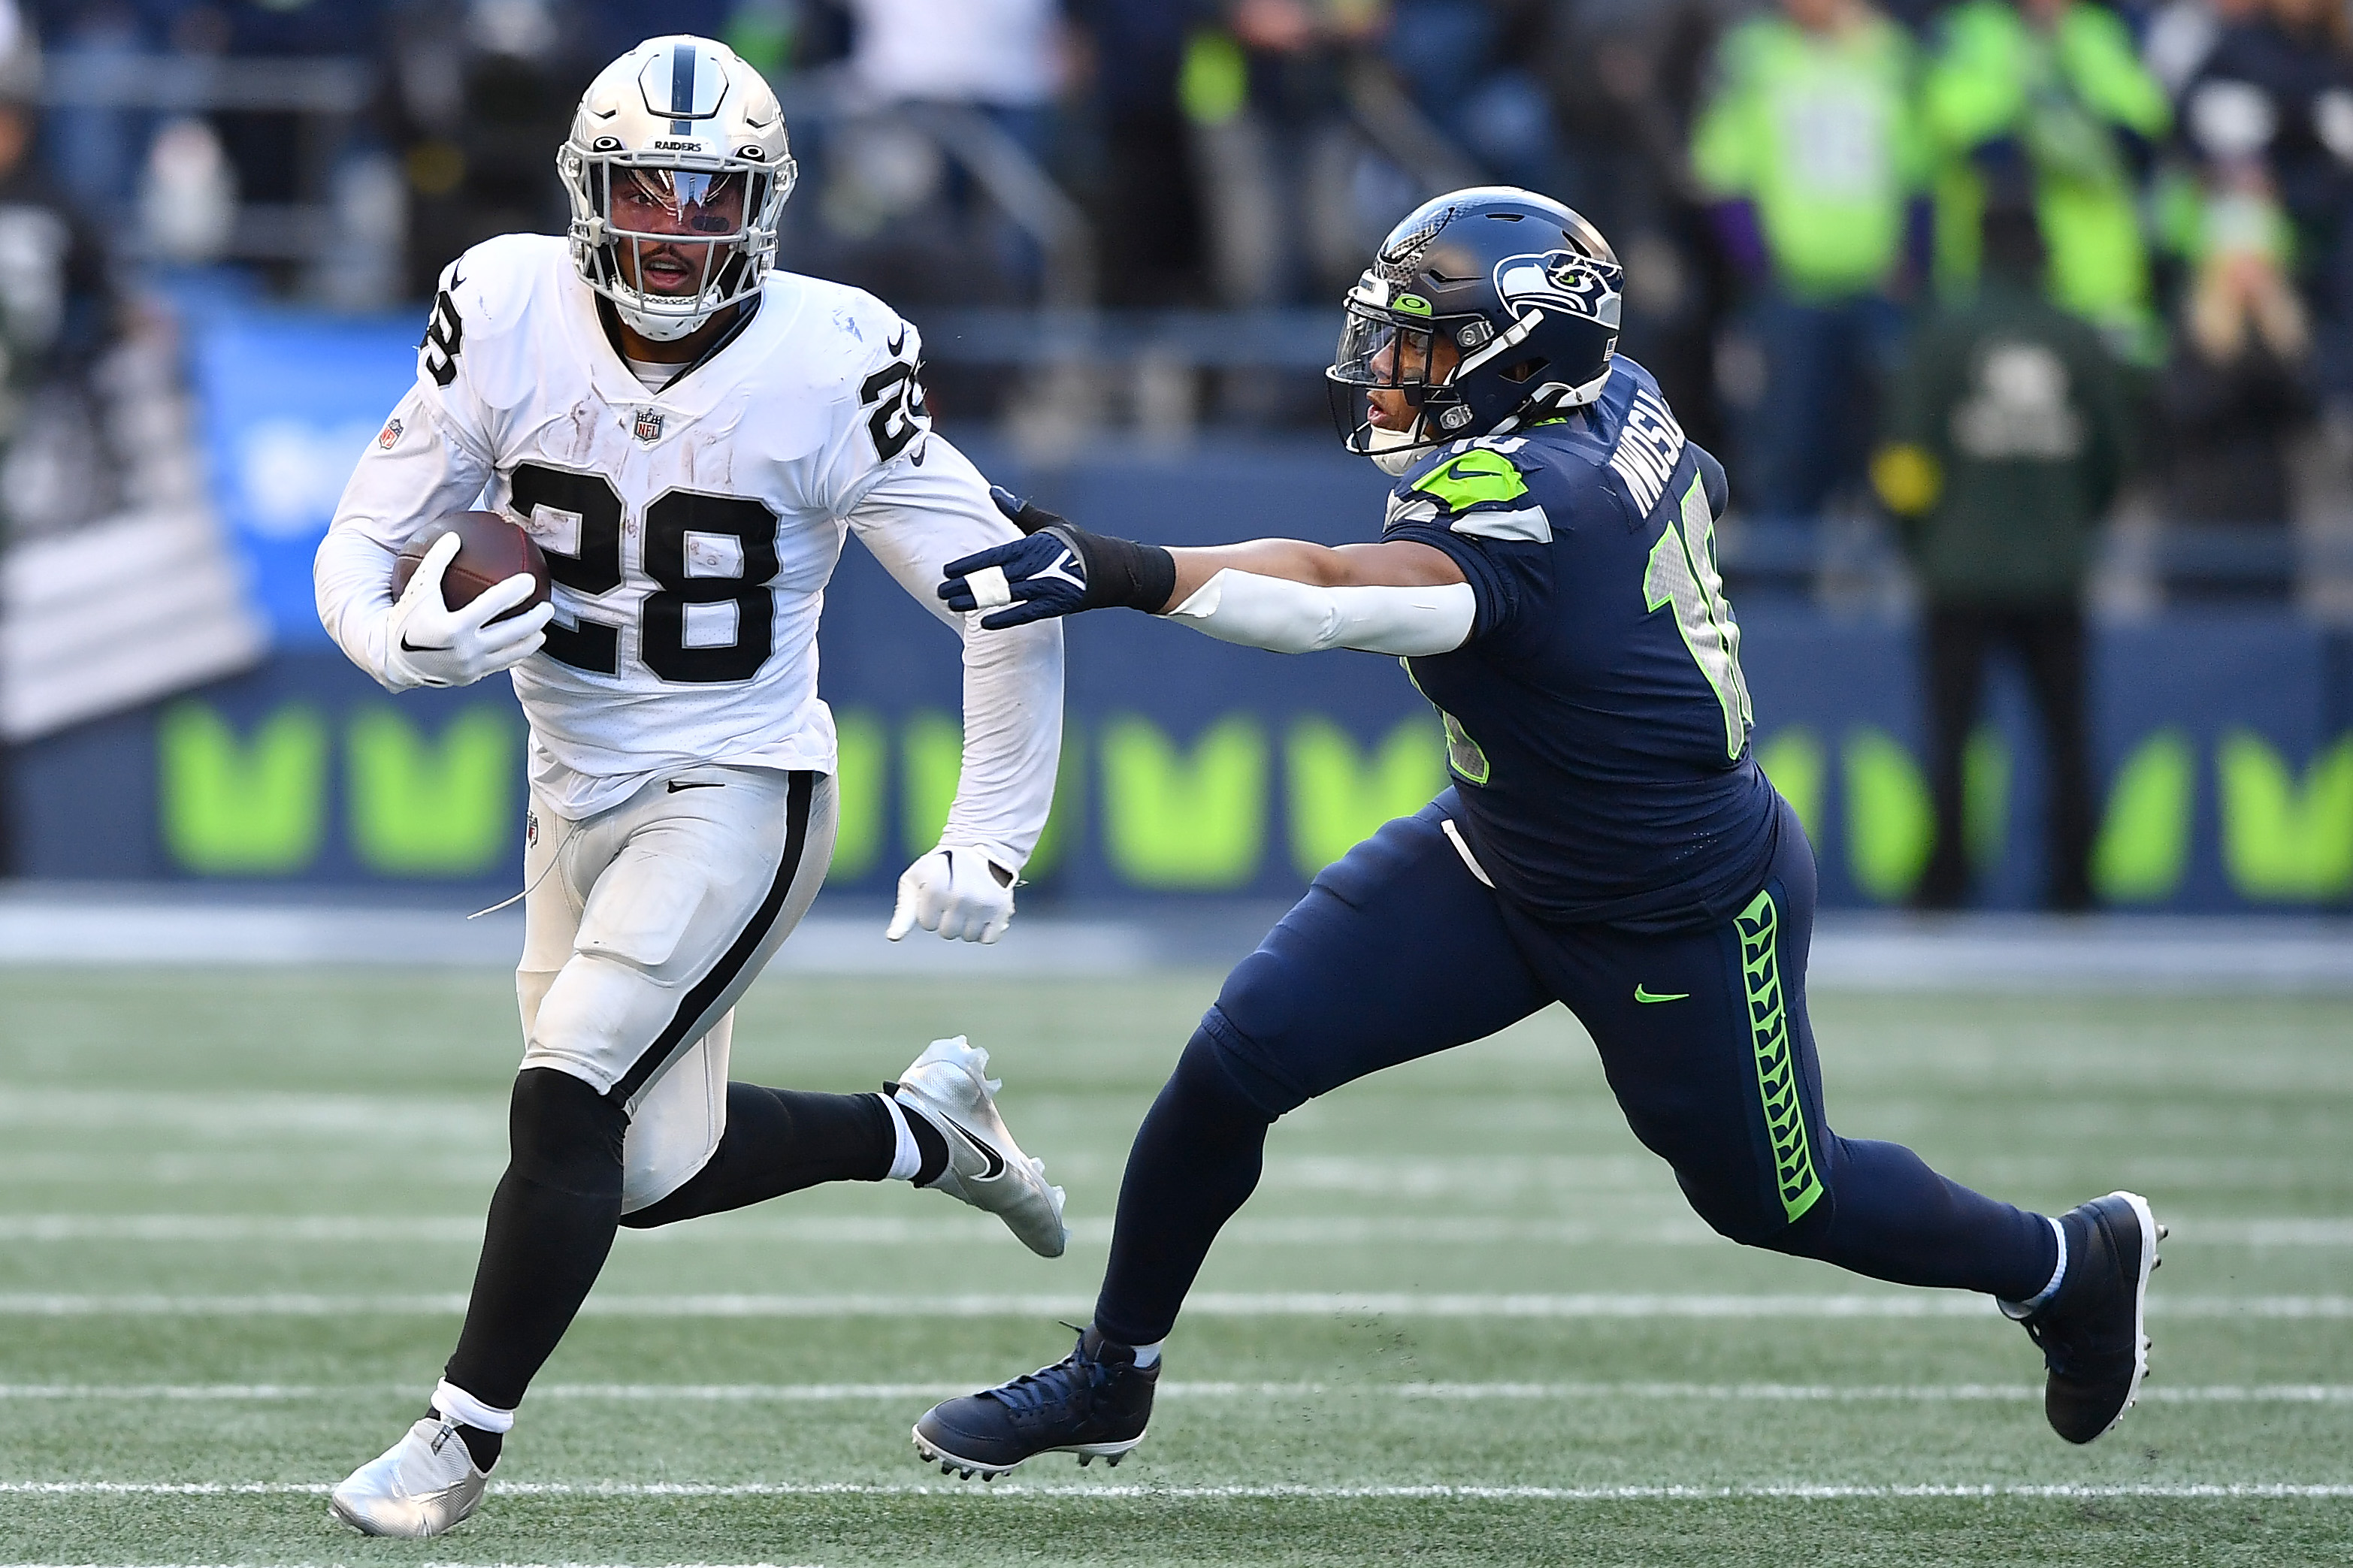 Josh Jacobs #28 of the Las Vegas Raiders runs with the ball while being chased by Uchenna Nwosu #10 of the Seattle Seahawks in the third quarter at Lumen Field on November 27, 2022 in Seattle, Washington.